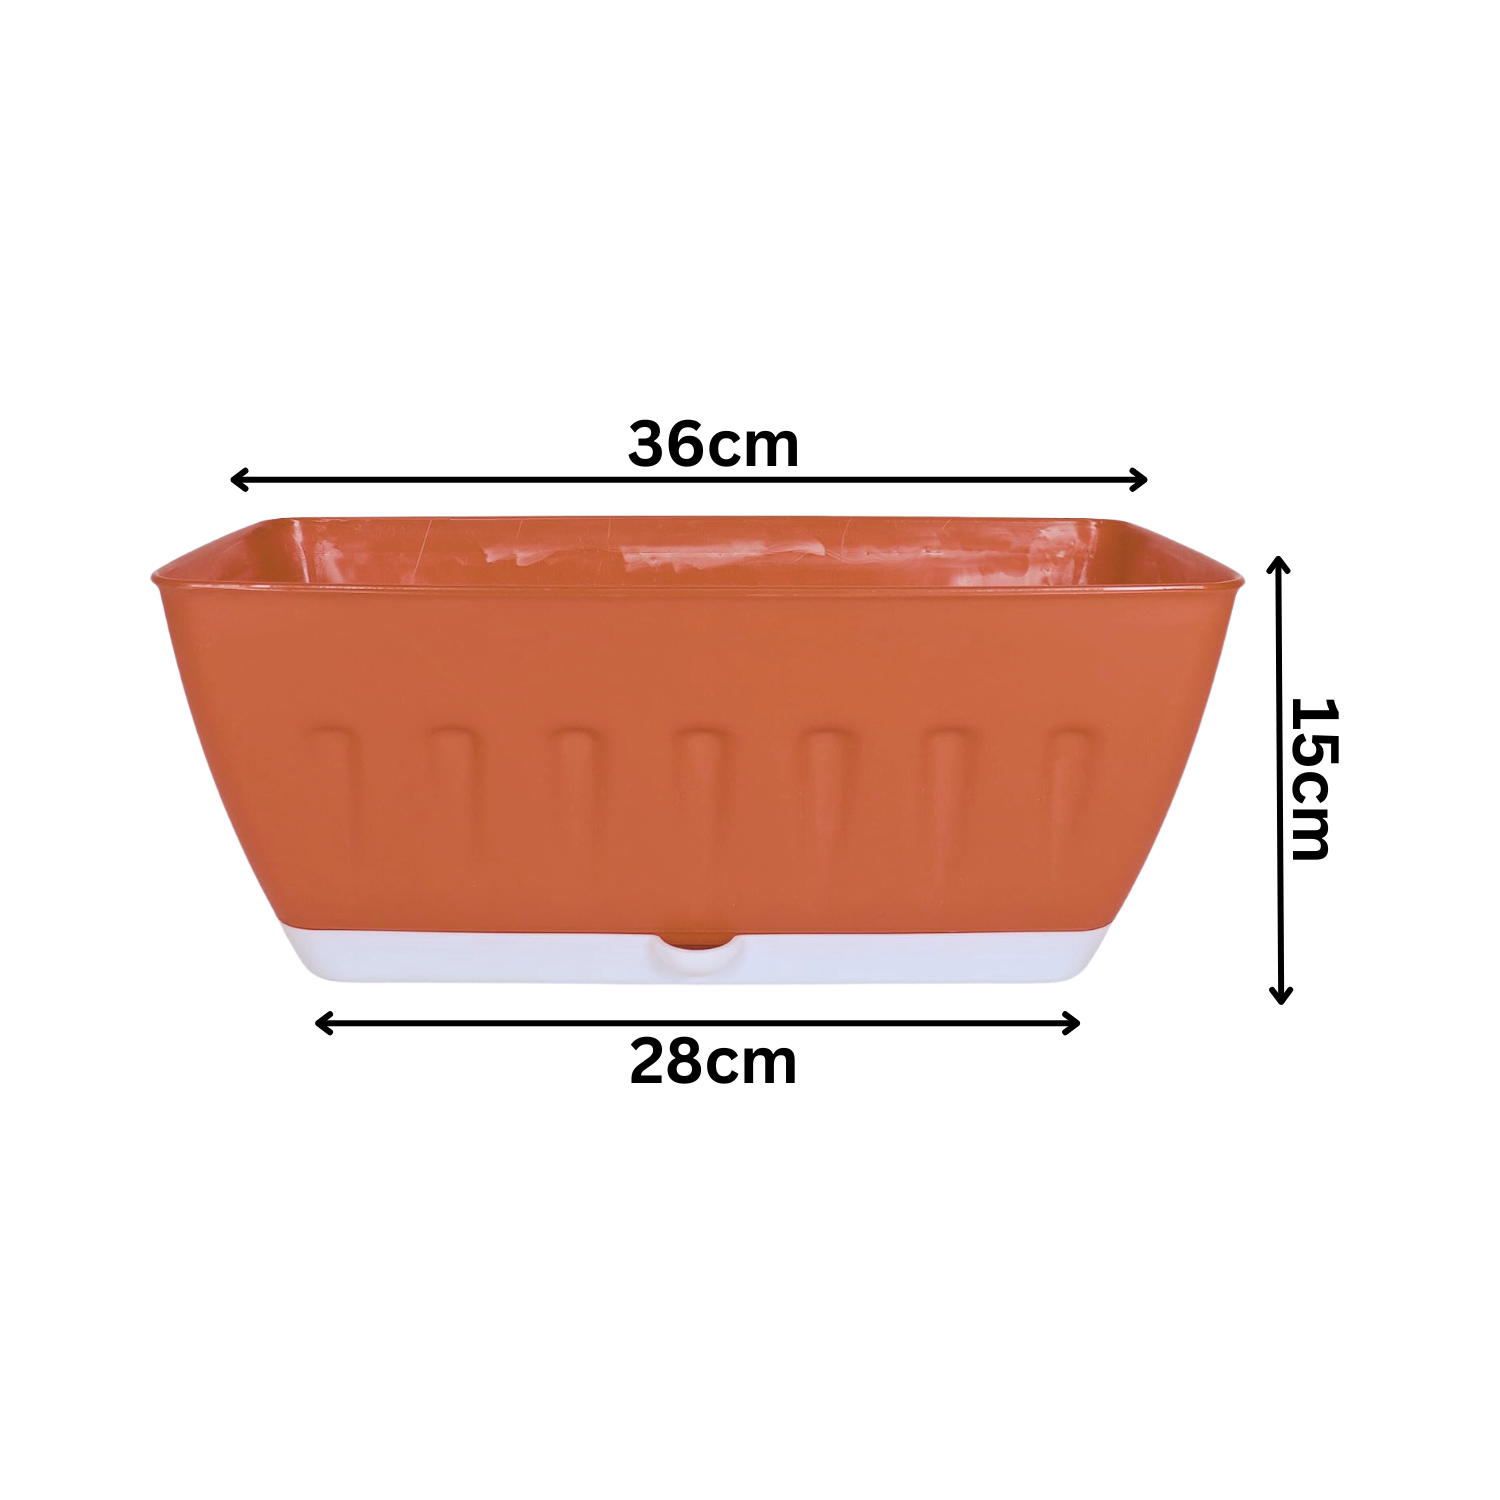 Khidki Rectangle 36CM Selfwatering Window Planter for Home Gardening | Lawns and Gardens | Flower Pots for Home Balcony Garden